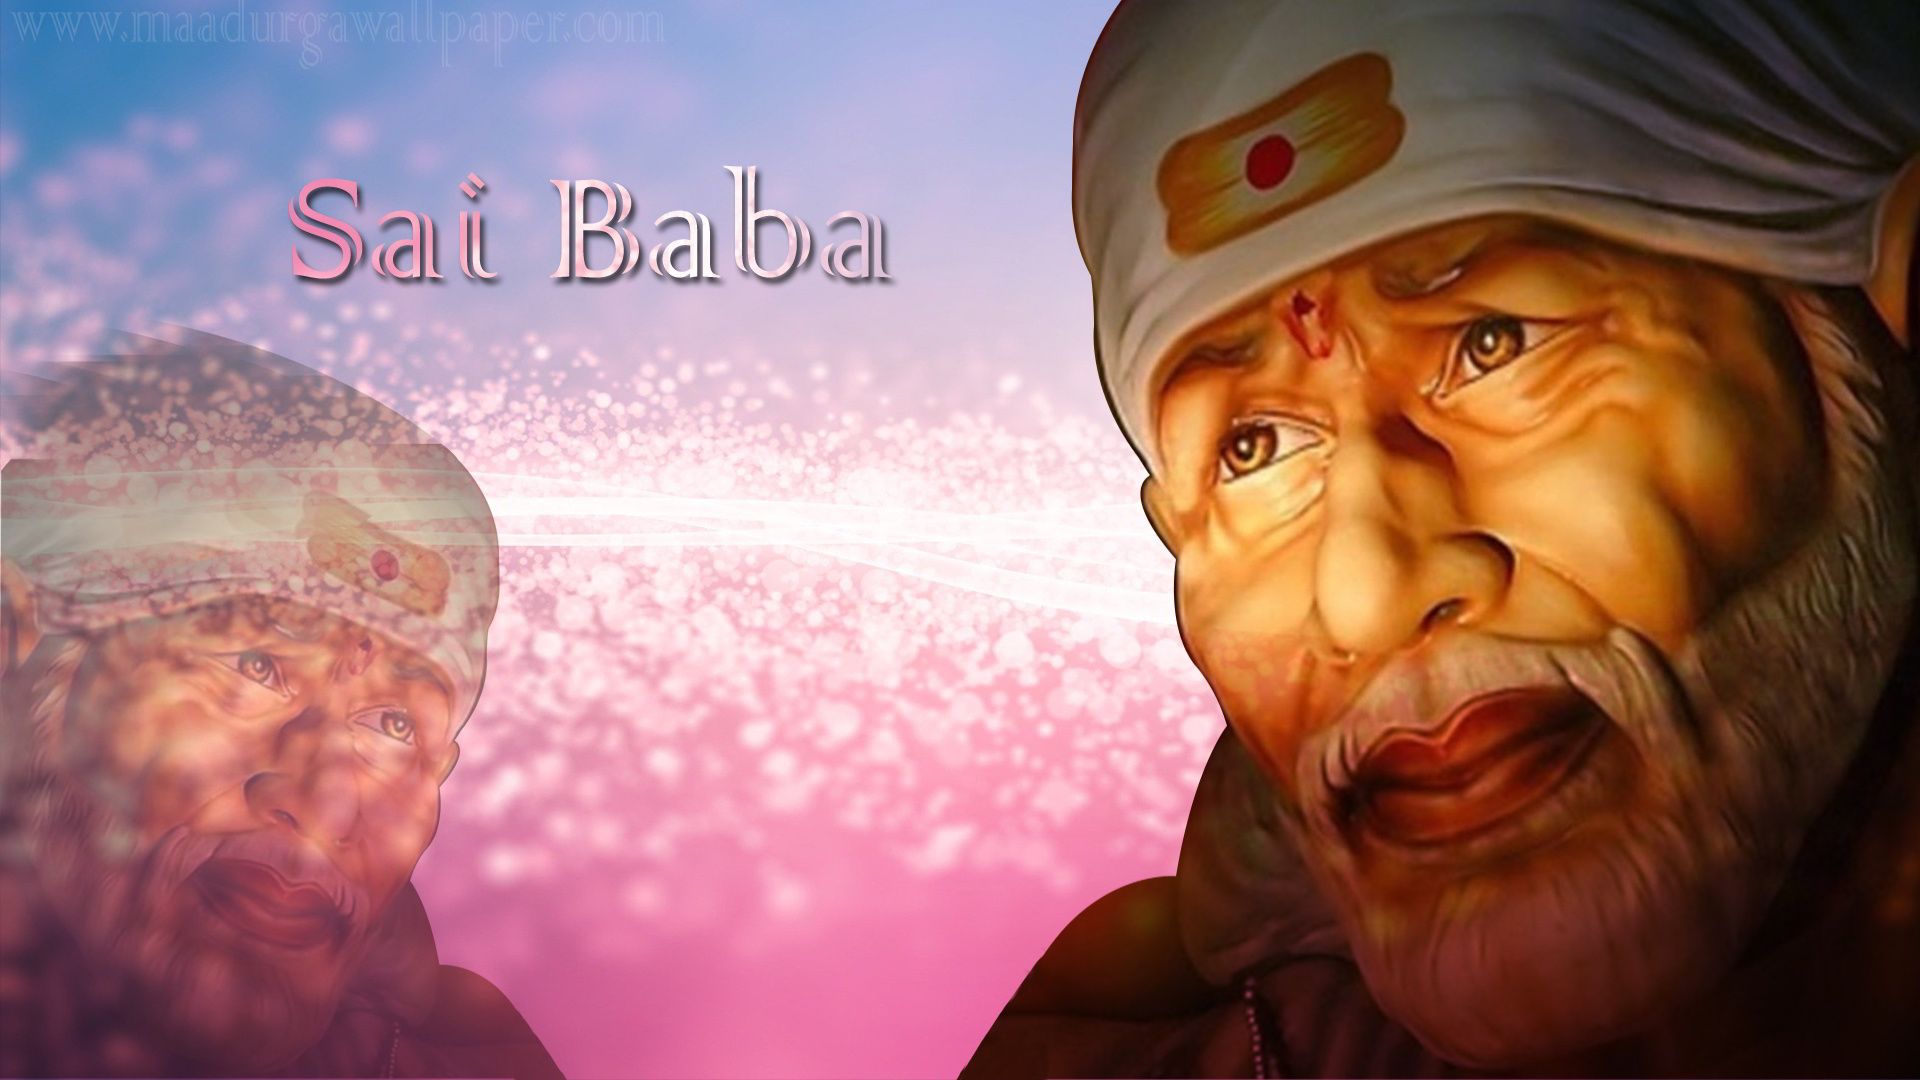 Sai Baba Shirdi Photo depicted with artistic background